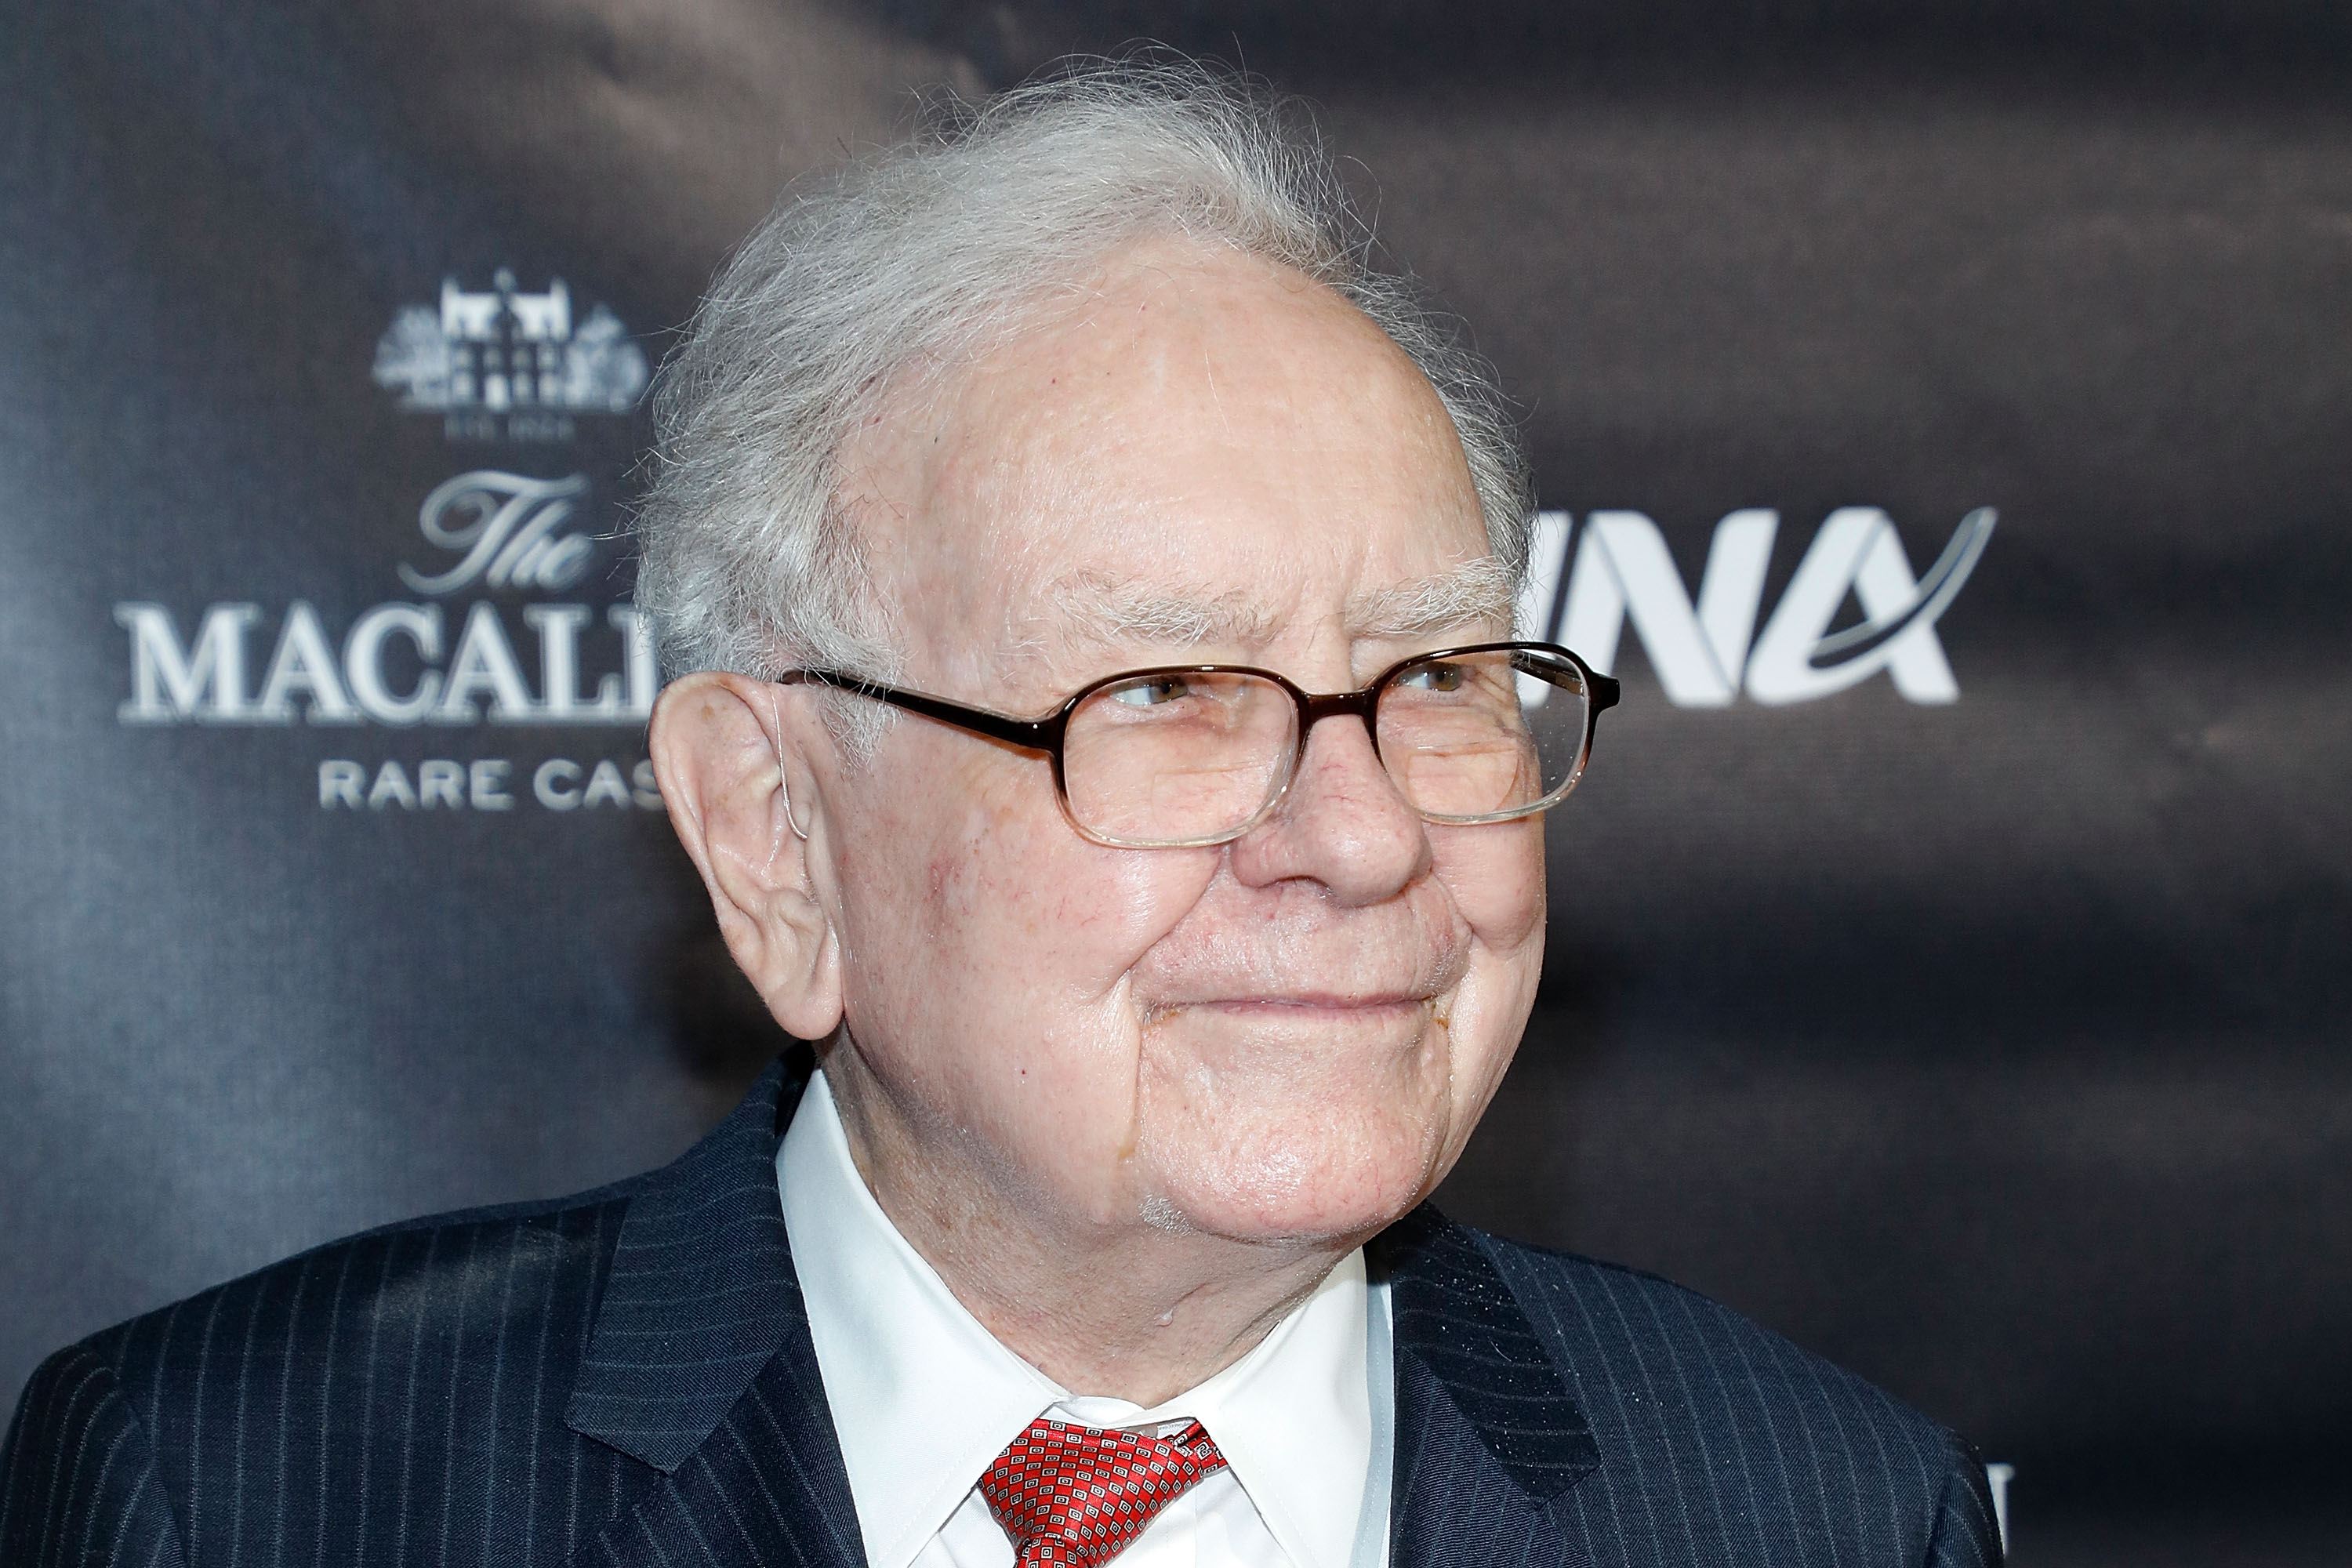 Warren Buffett, Who Advocates Higher Taxes, Defends Paying the Least Among America's Richest